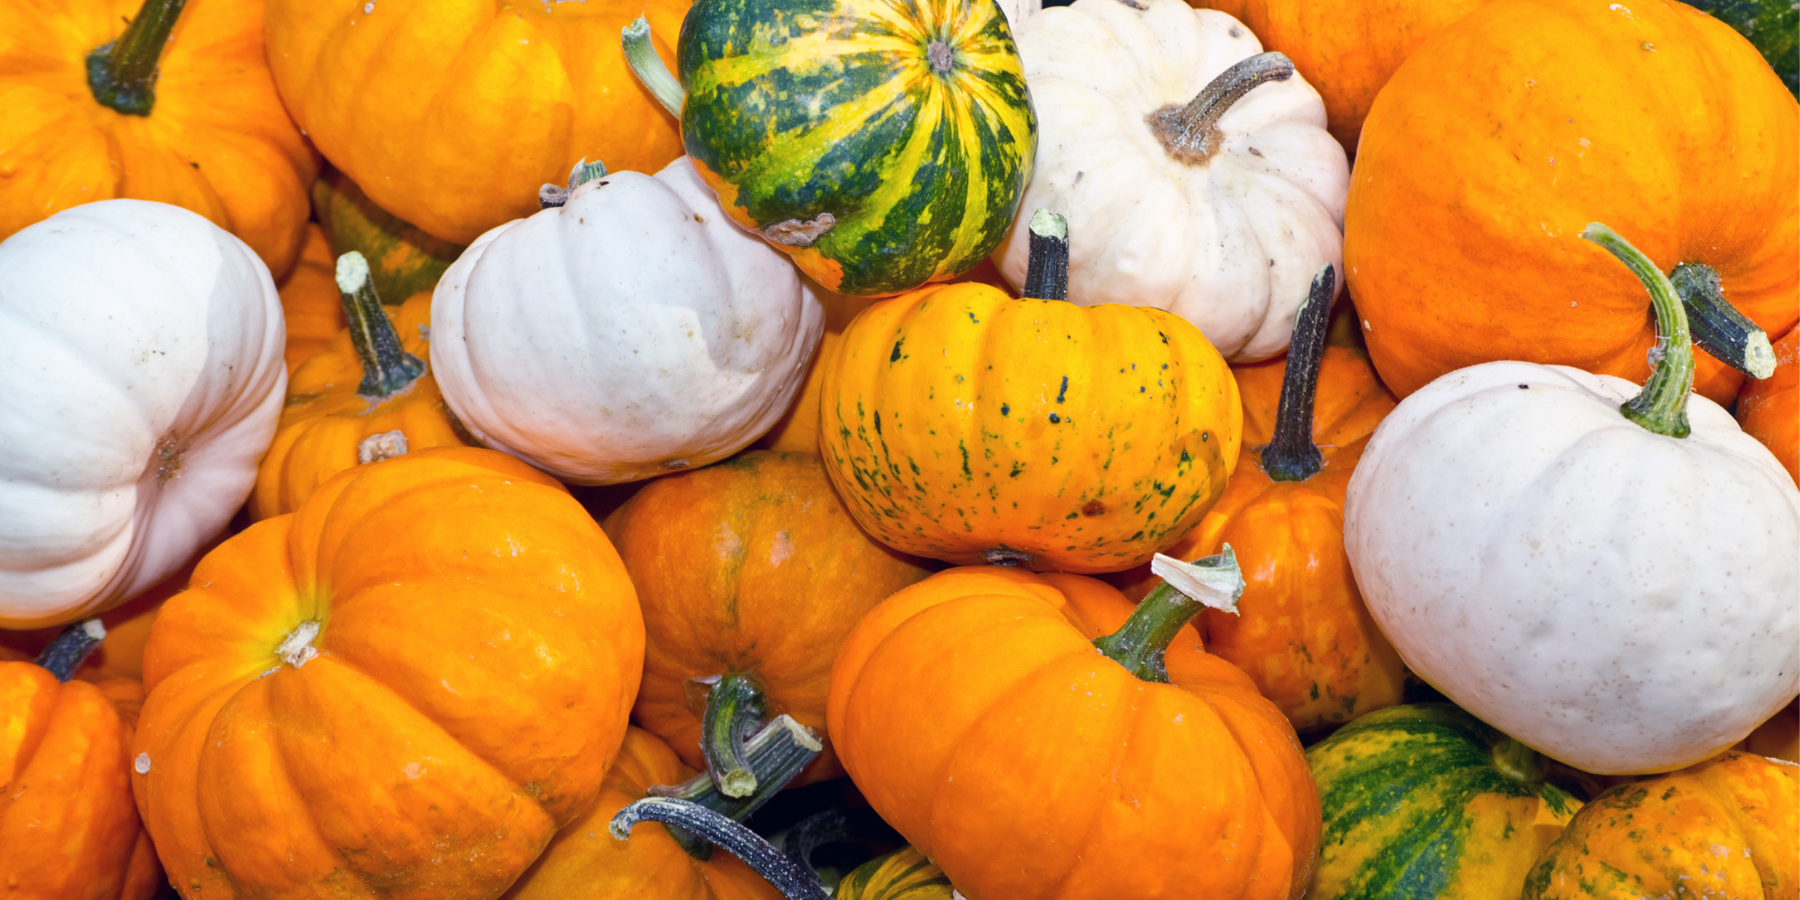 How to Grow Your Own Pumpkins